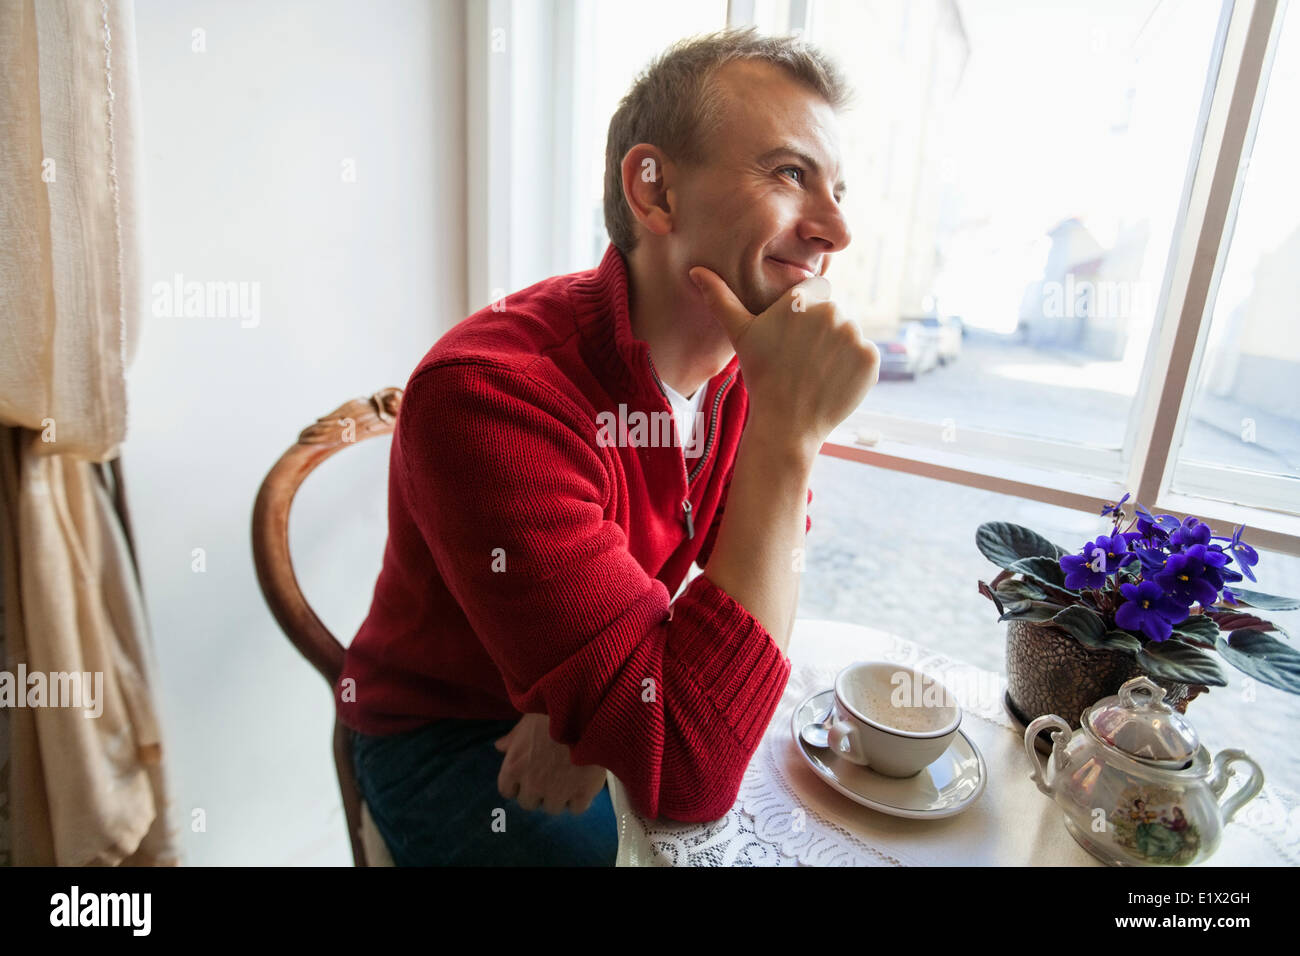 Thoughtful mid adult man sitting at table in cafe Stock Photo